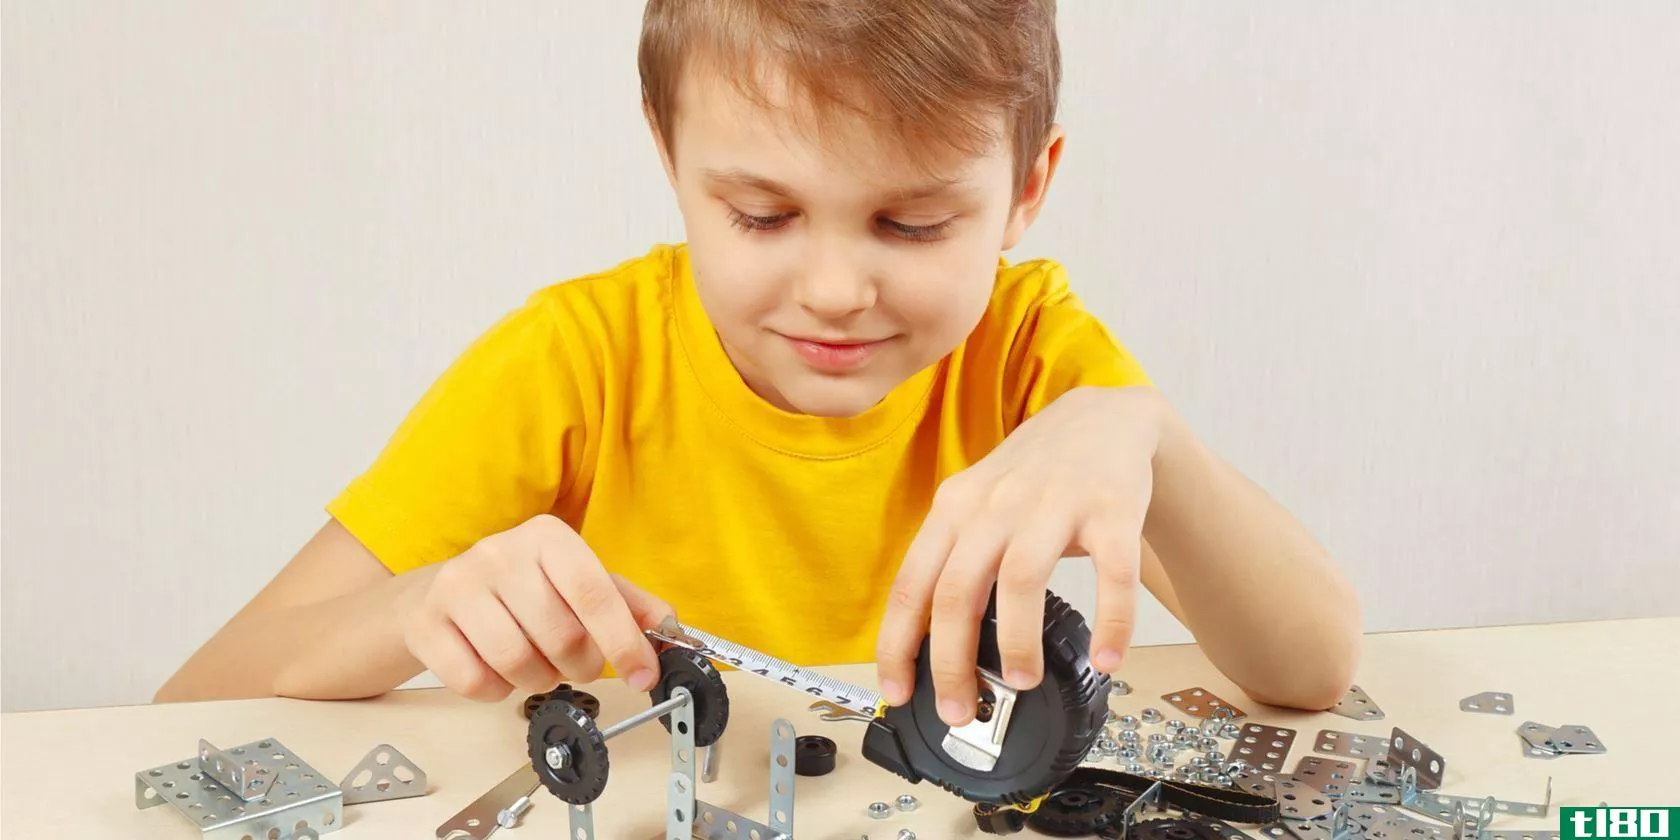 stem-toys-kids-featured